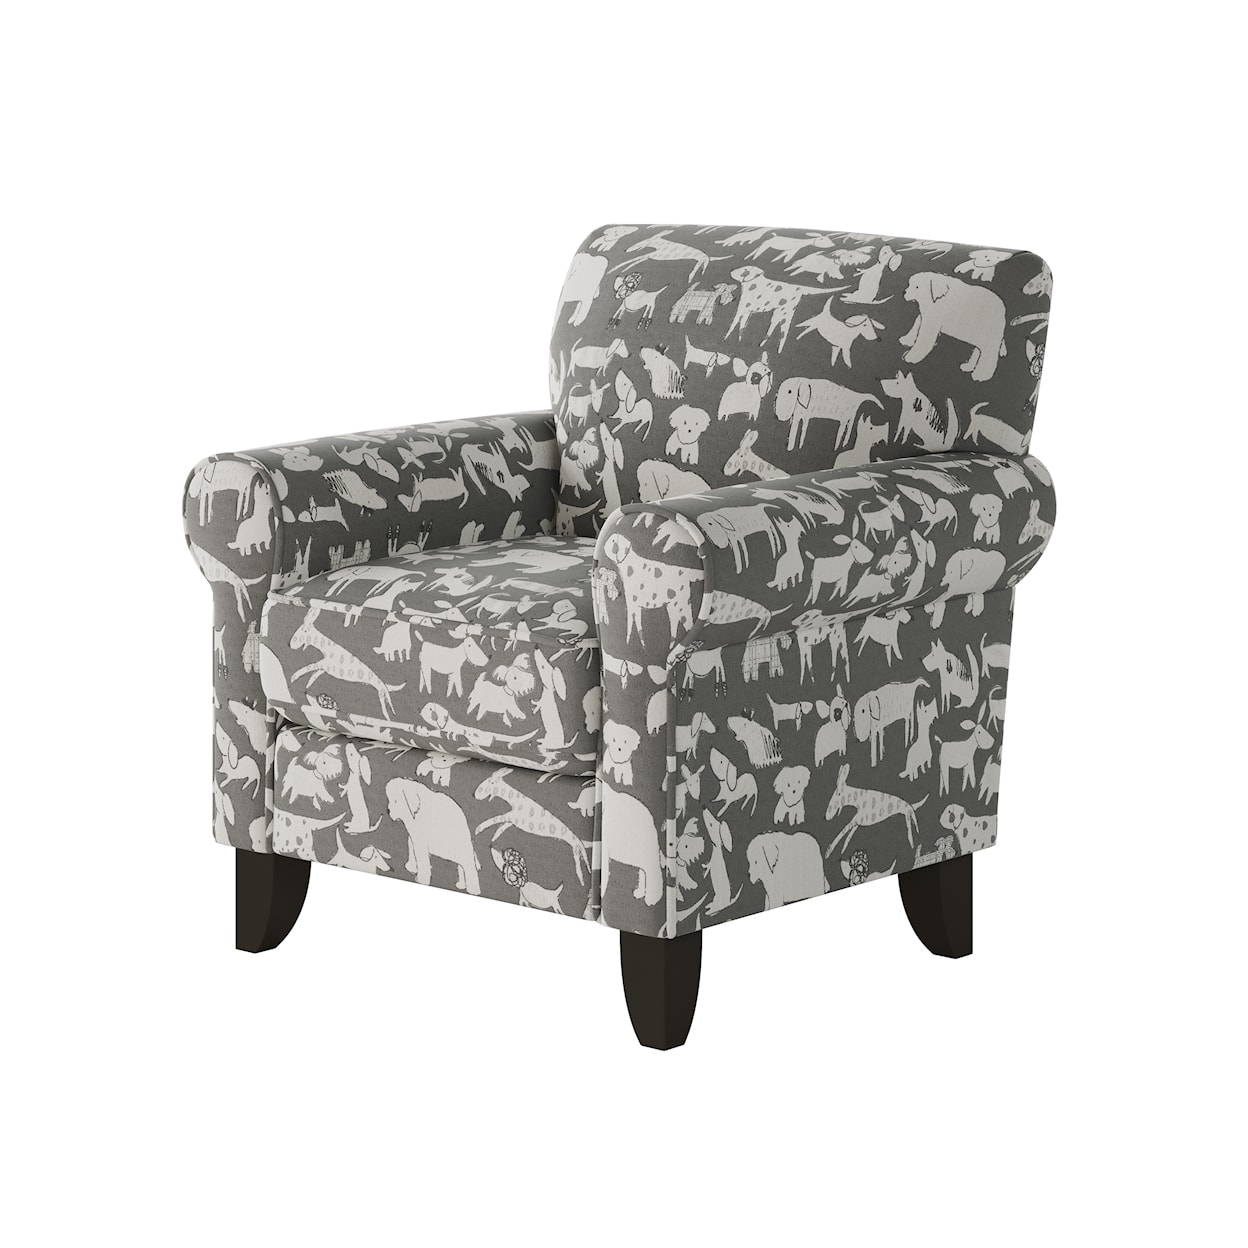 Fusion Furniture Grab A Seat Accent Chair